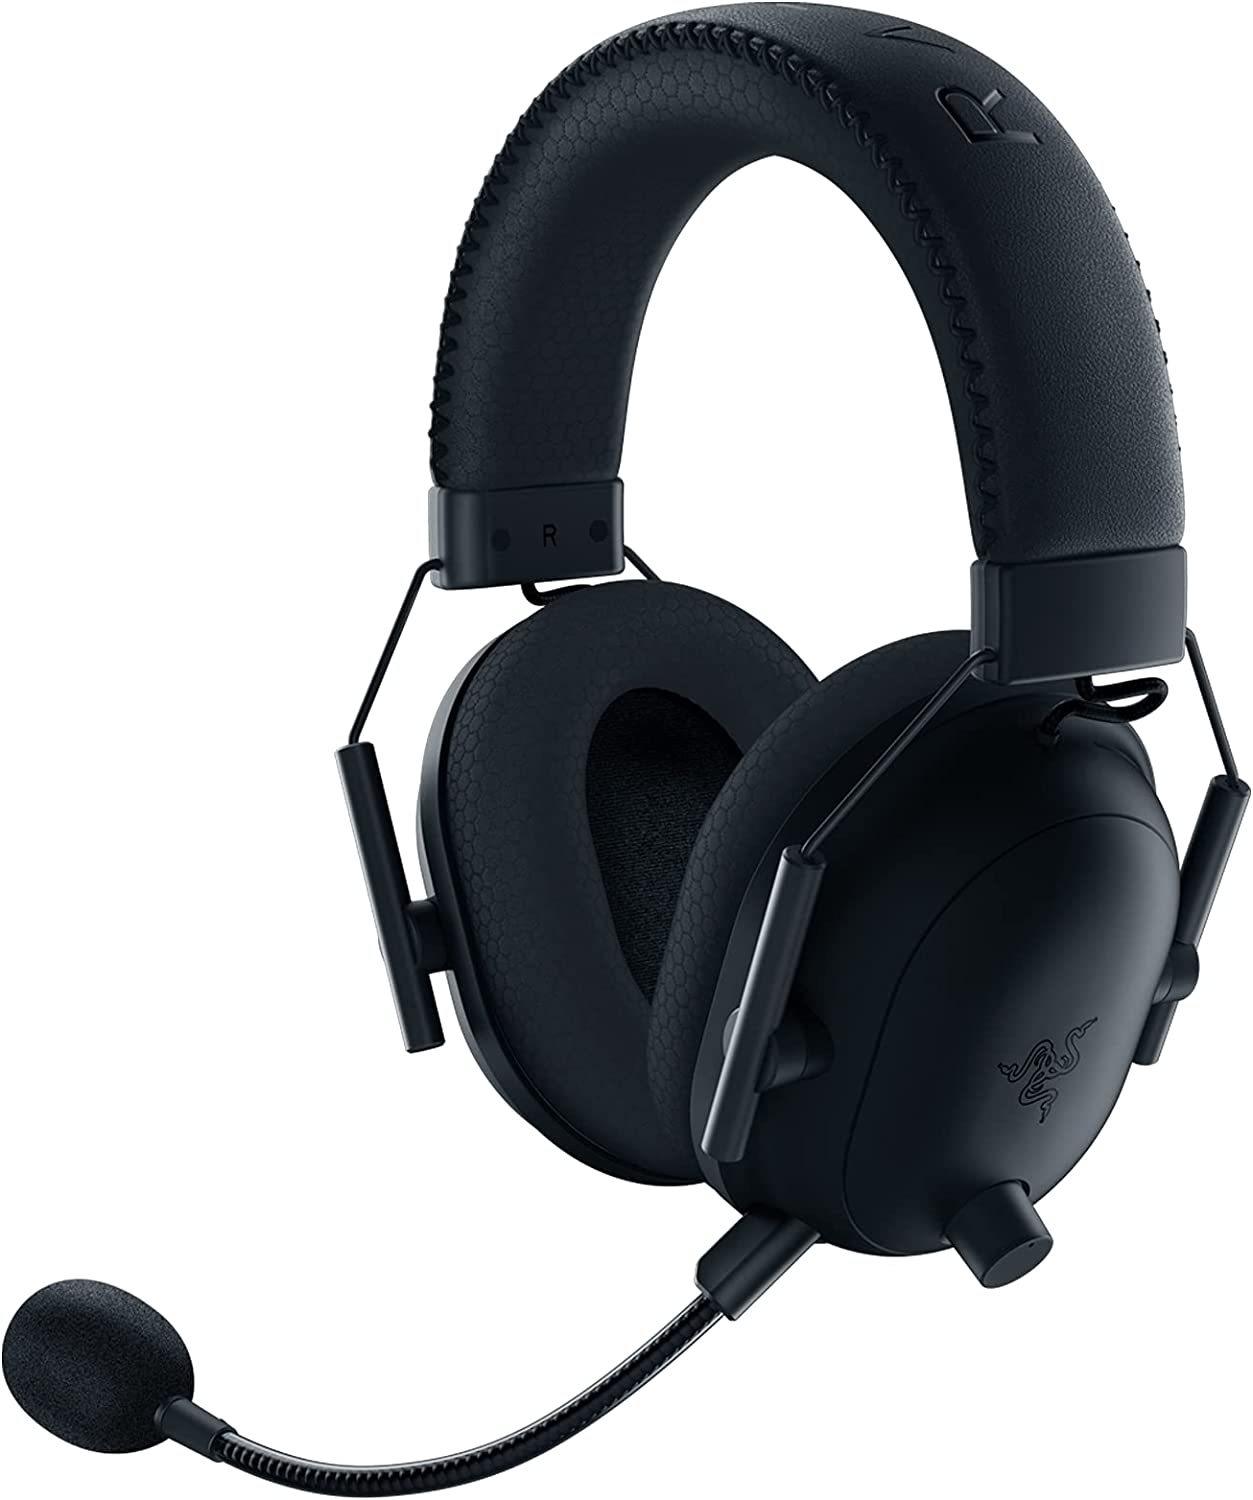 Amazon-Prime-Day-Gaming-Headset-Deals